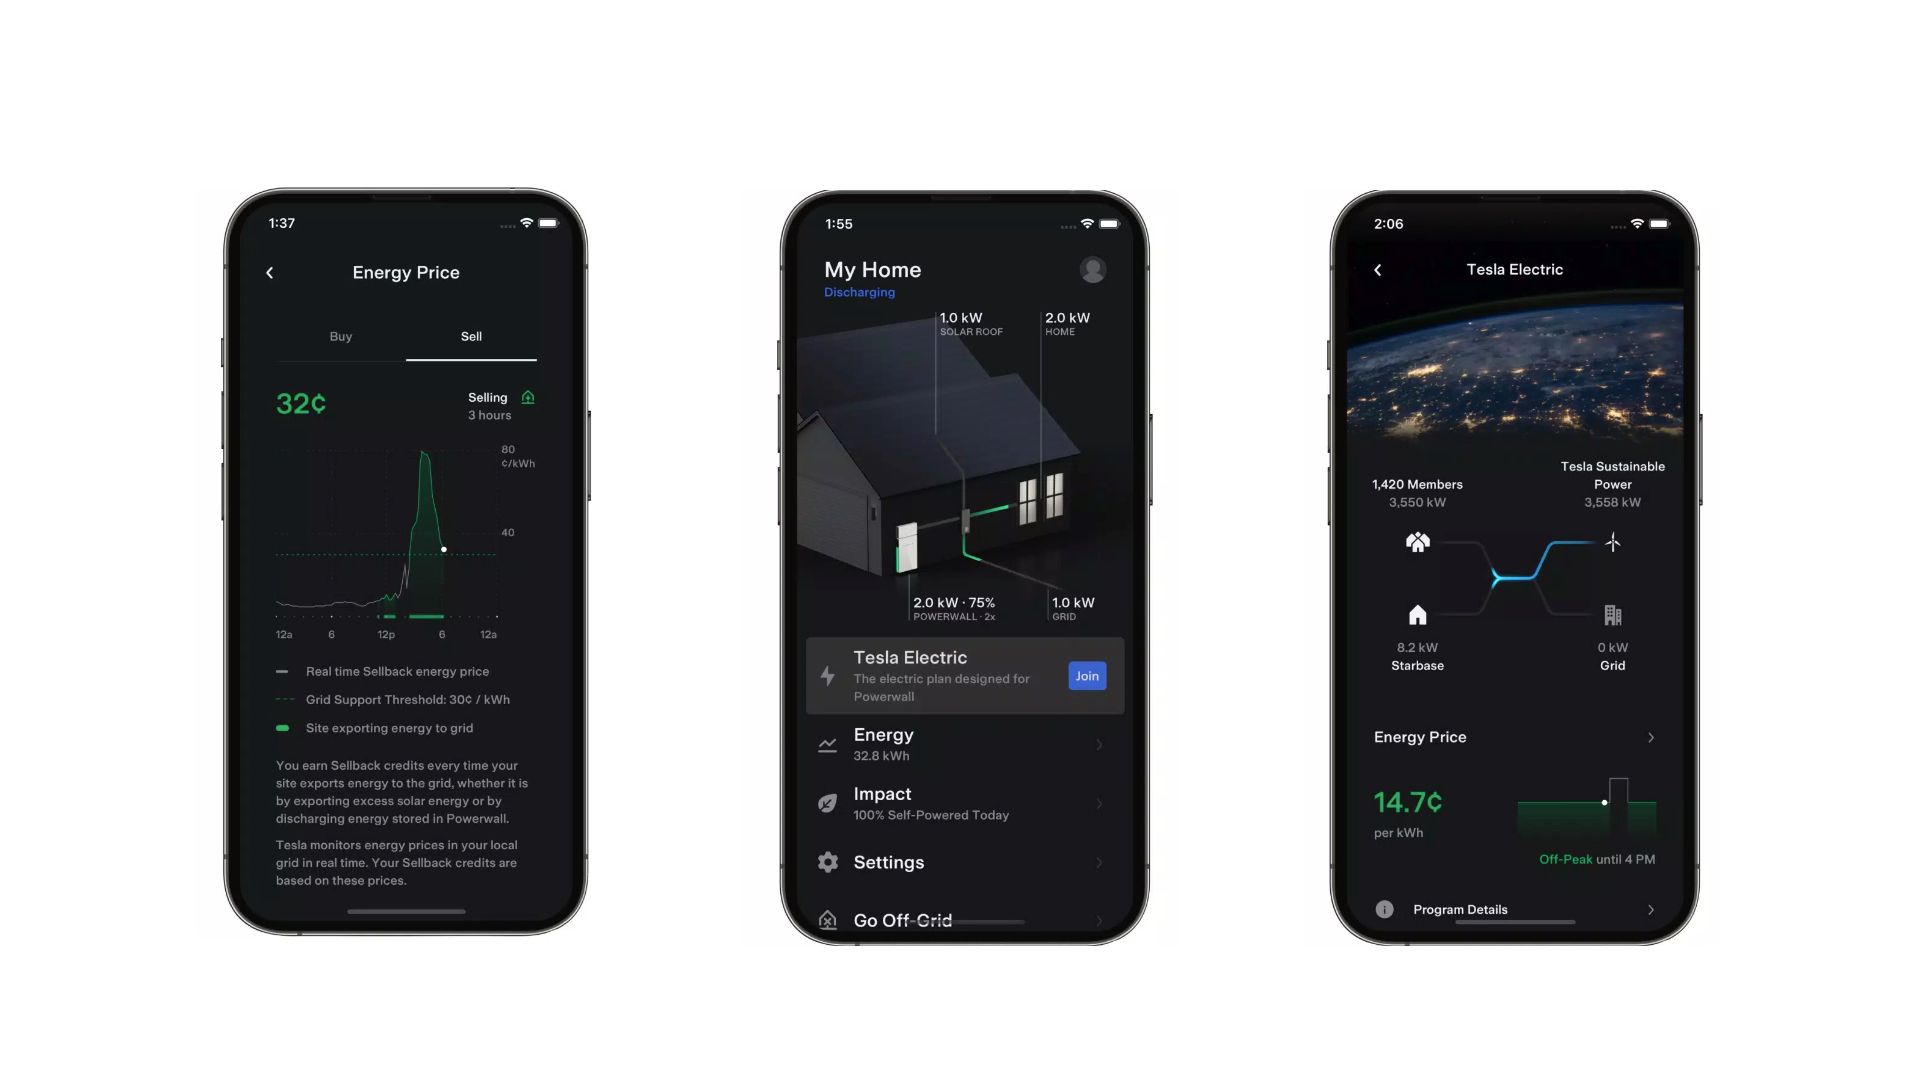 Tesla Electric power monitor and price tracker displayed on three smartphones.